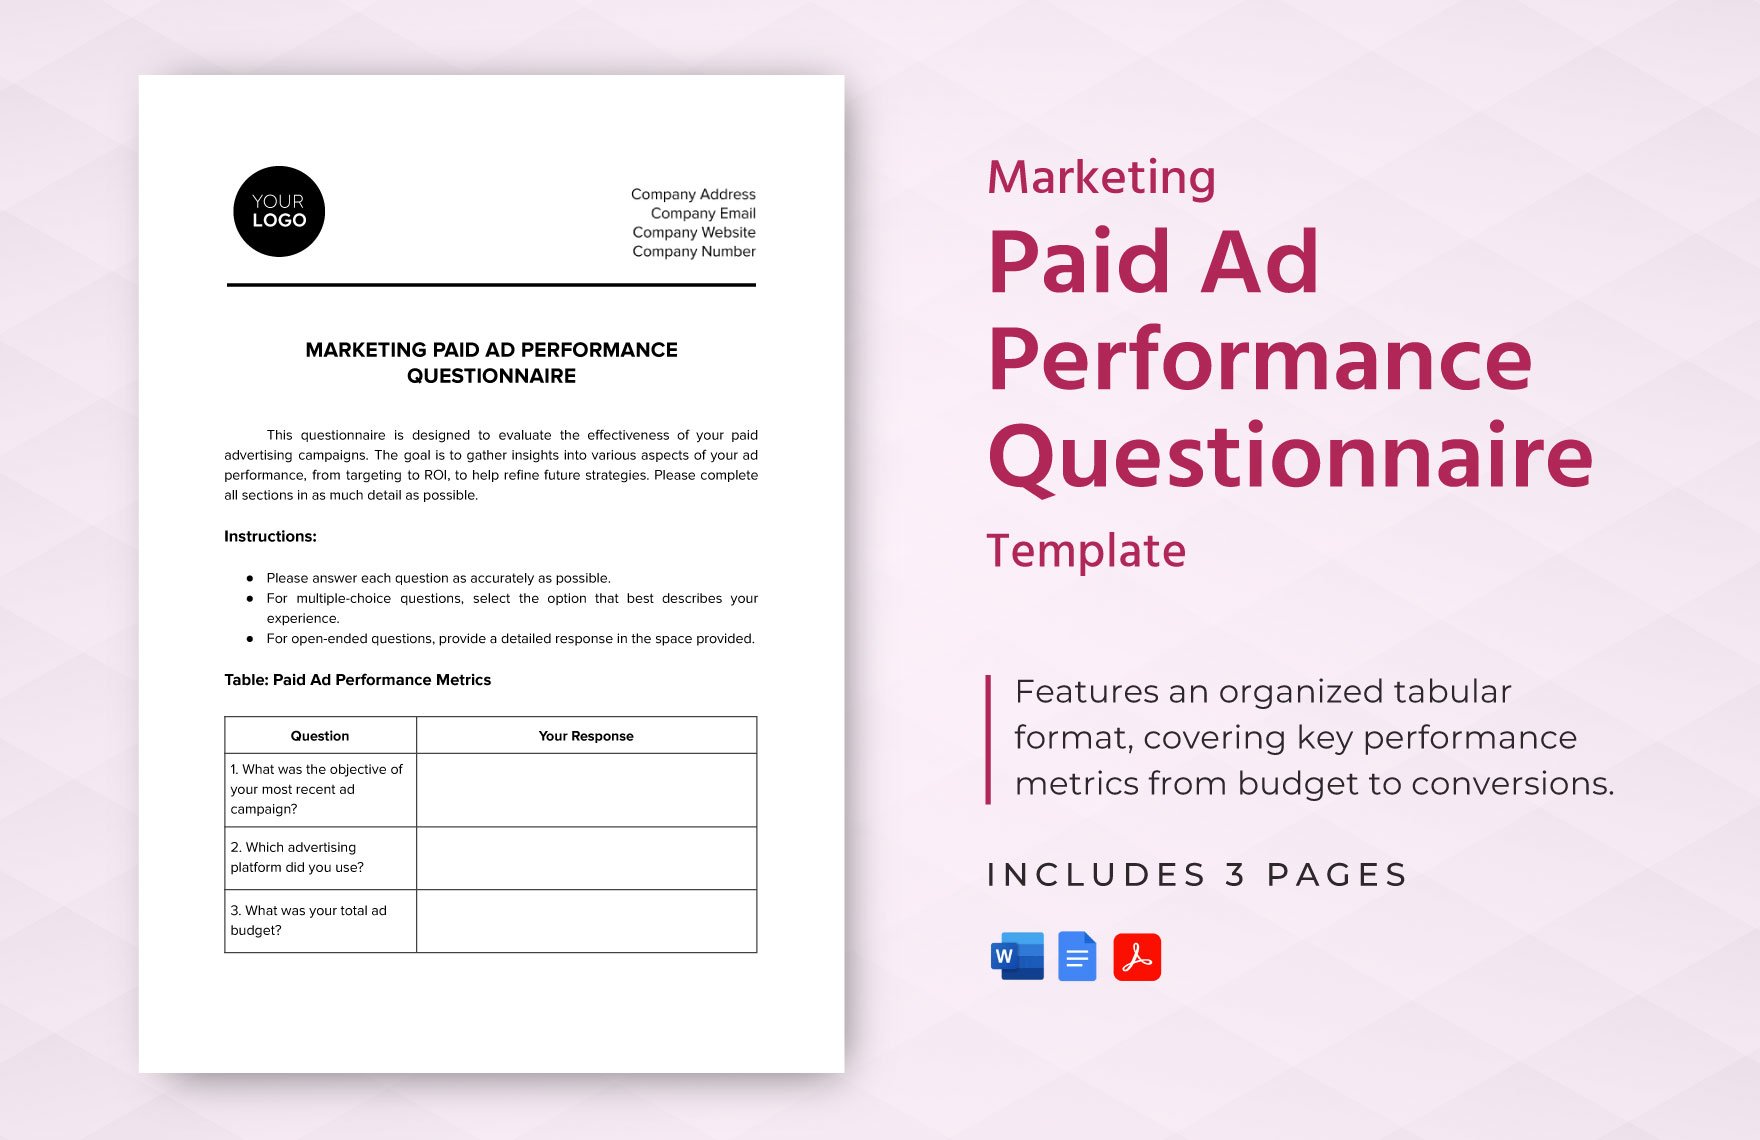 Marketing Paid Ad Performance Questionnaire Template in Word, Google Docs, PDF